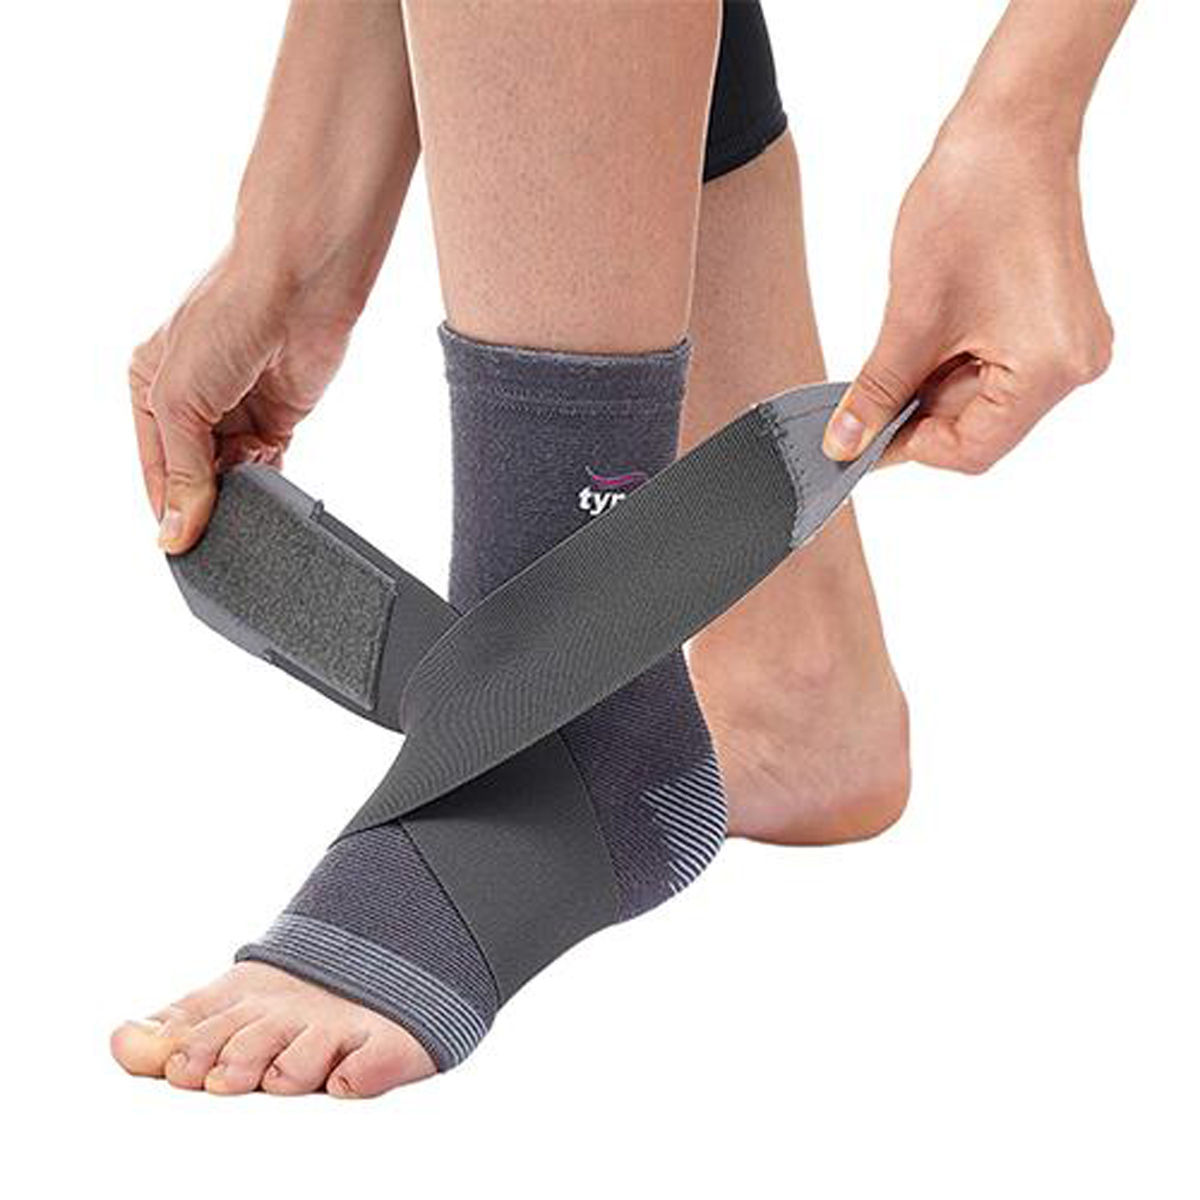 Buy Tynor Ankle Binder Single Large, 1 Count Online